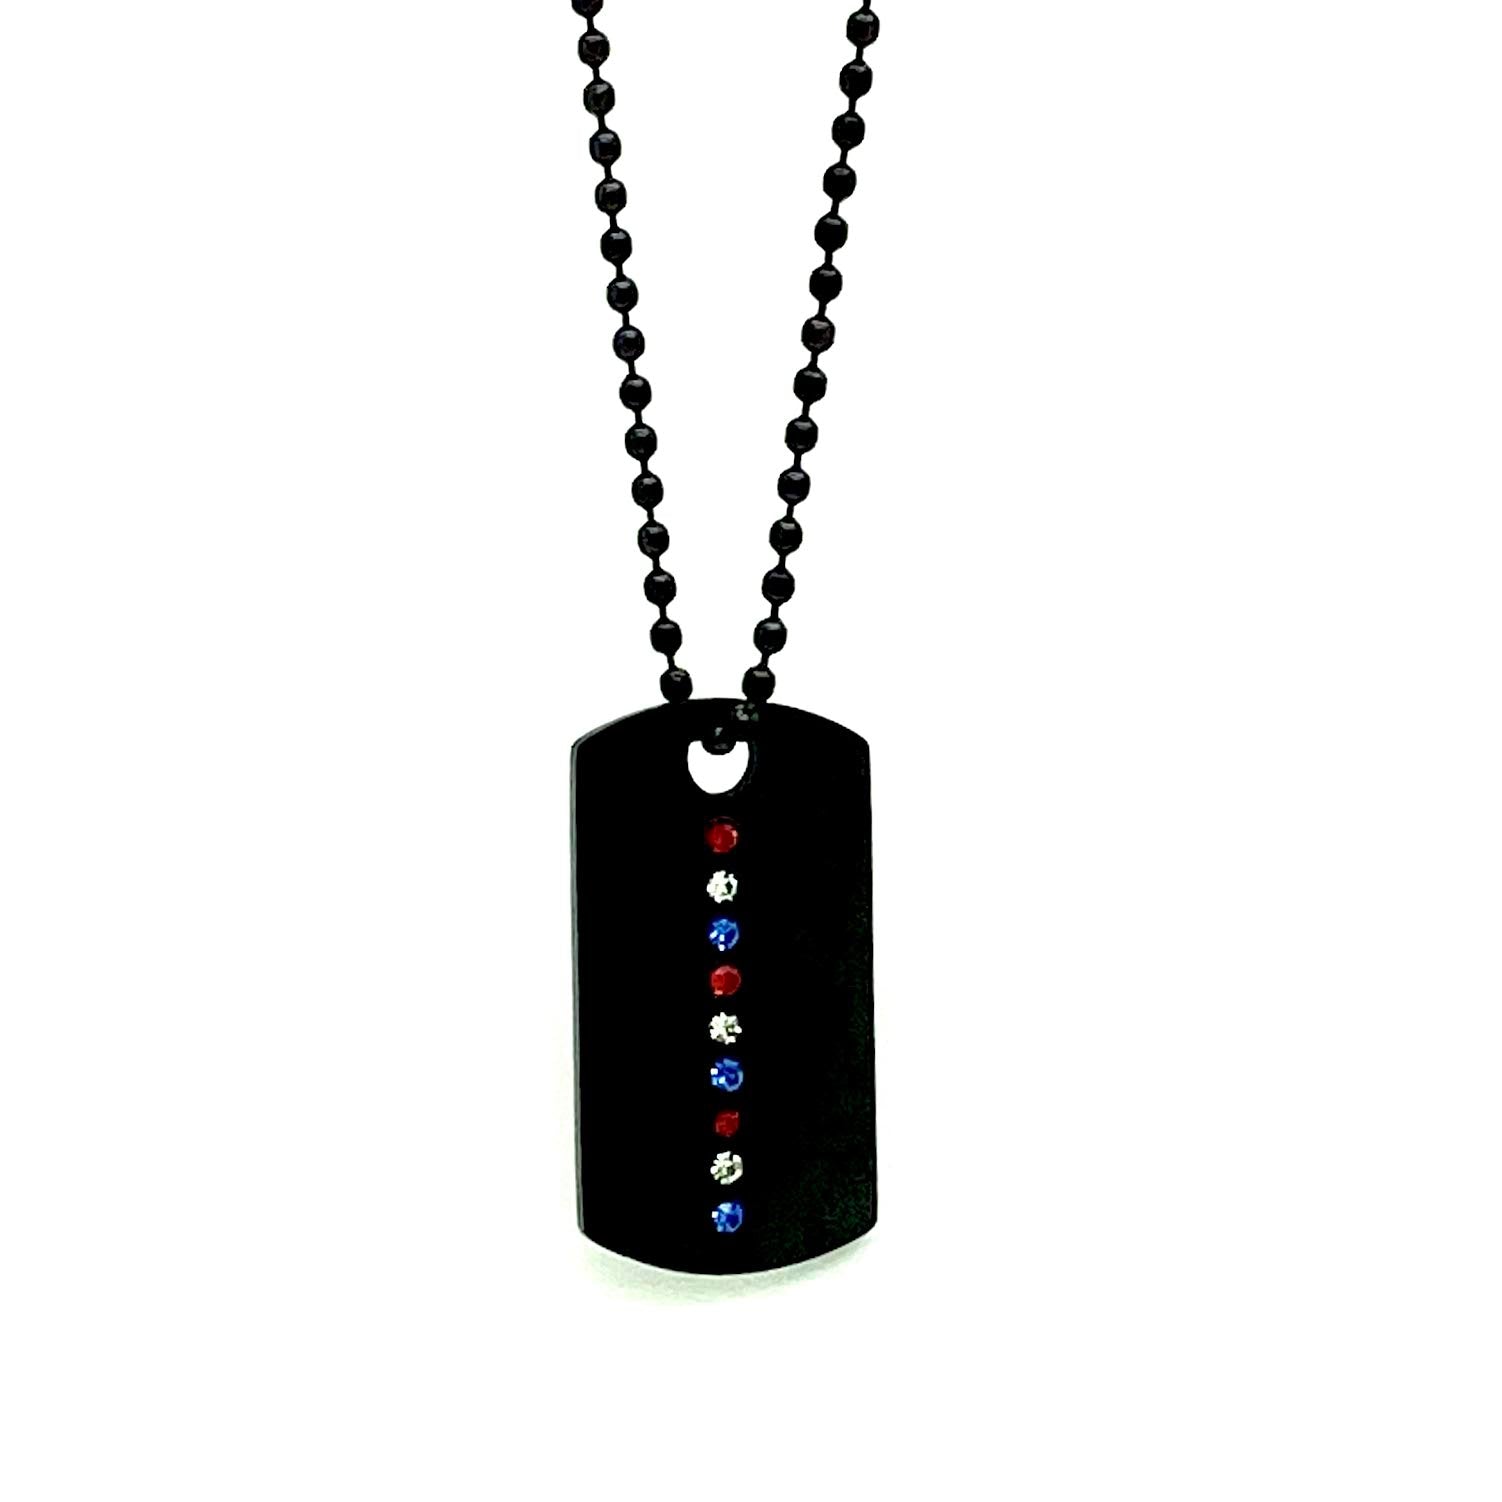 Team USA Olympic Dog Tags. Olympic Jewelry. Team USA. Made by WristBend